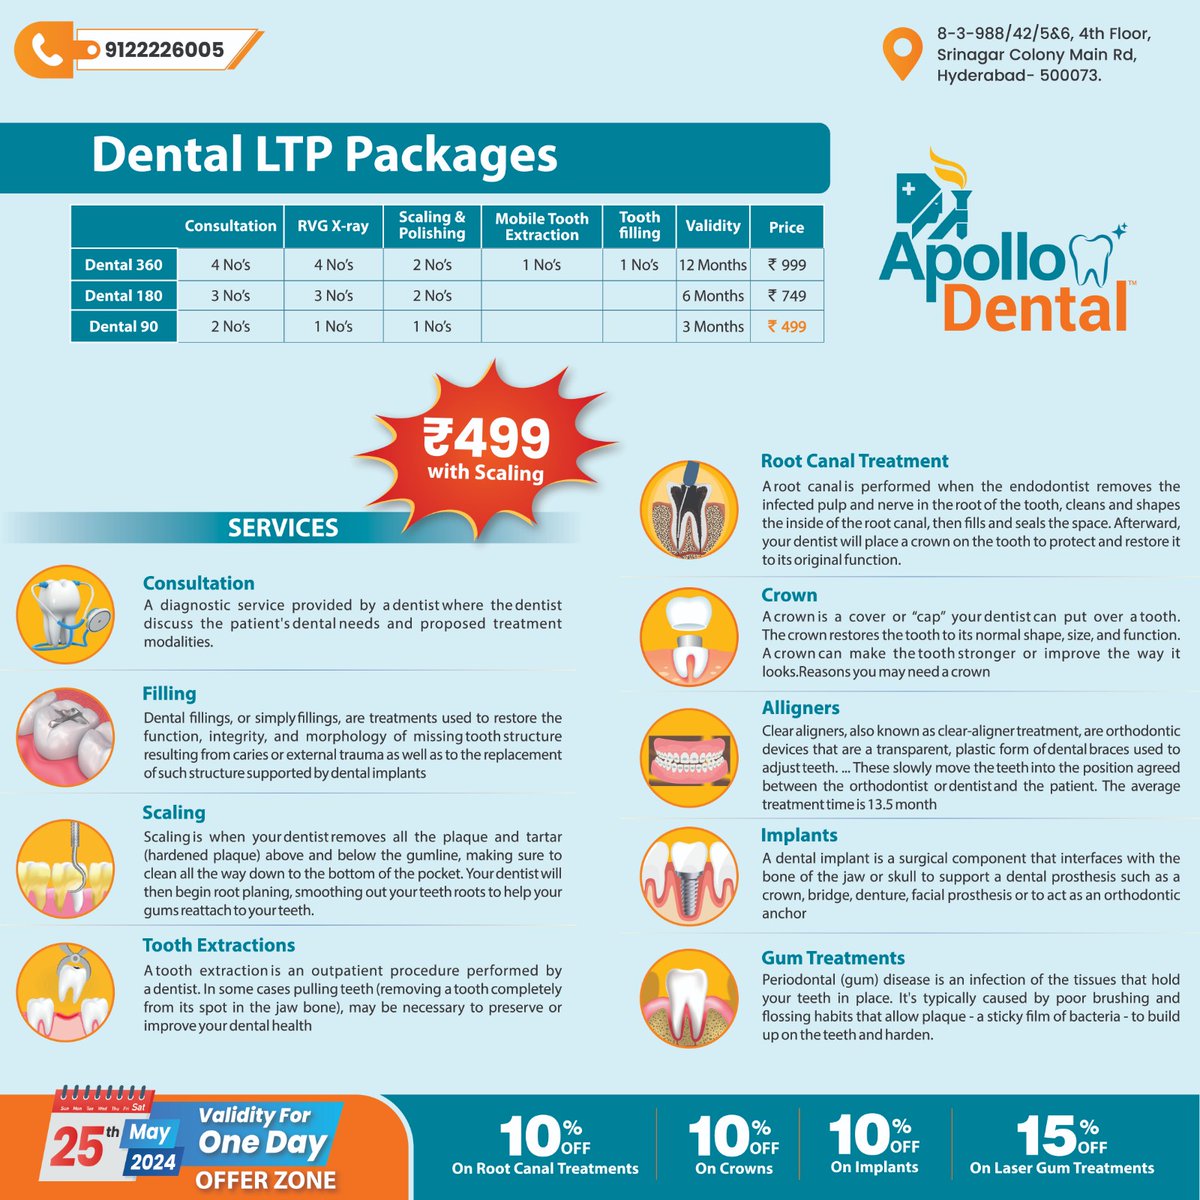 Brighten Your Smile: Comprehensive Dental LTP Packages Now Available!
Book Your Appointment Now
Call: 9122226005

#BrightSmile #Apollodentalclinic #Srinagarcolony #DentalPackages #LTPackages #DentalCare #OralHealth #HealthyTeeth #SmileConfidently #DentalServices